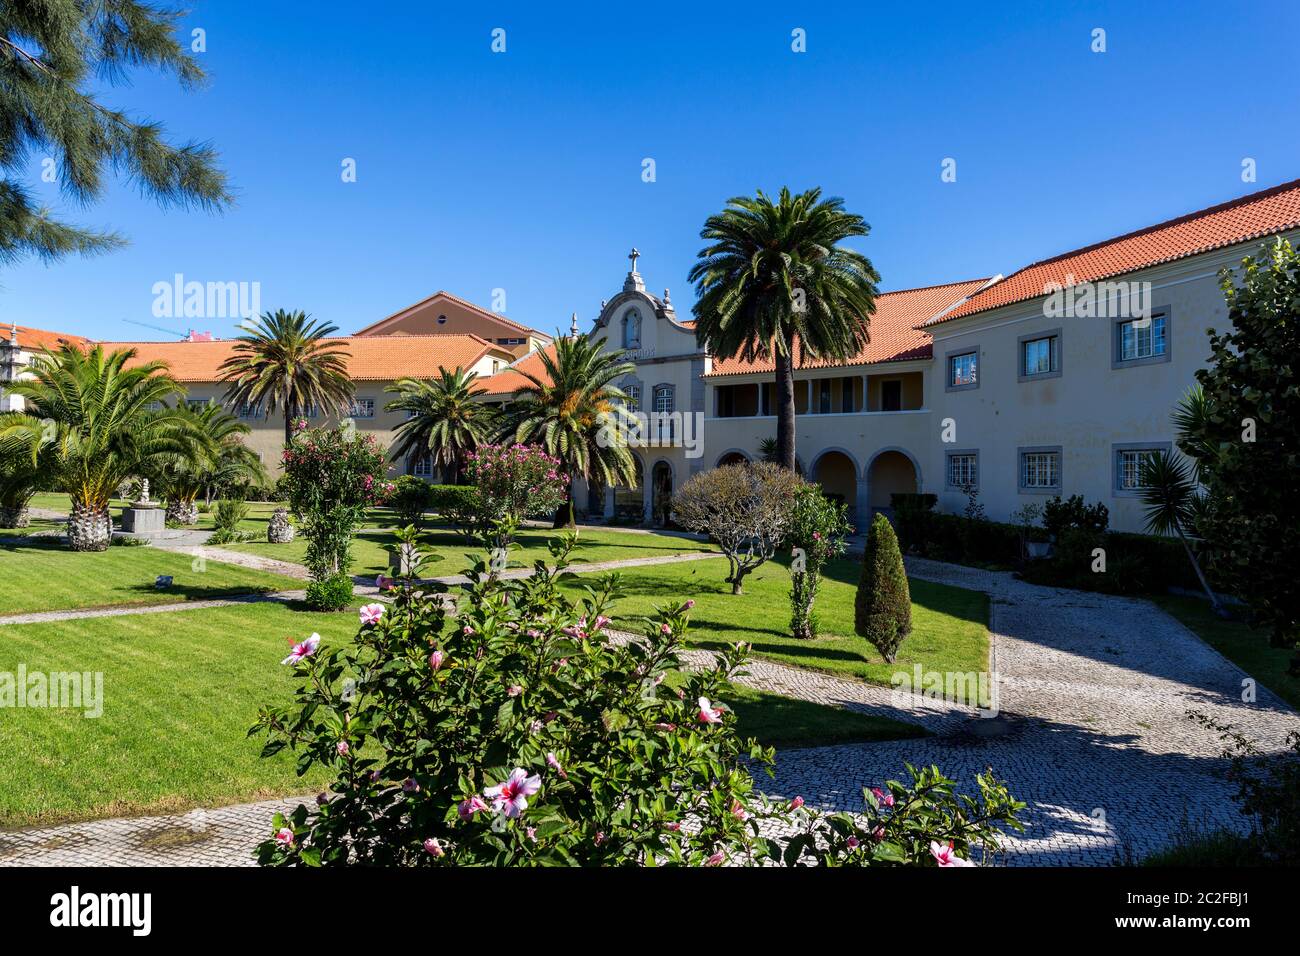 Facade of the main building of the private catholic school of the Salesians Congregation in Estoril, Portugal Stock Photo